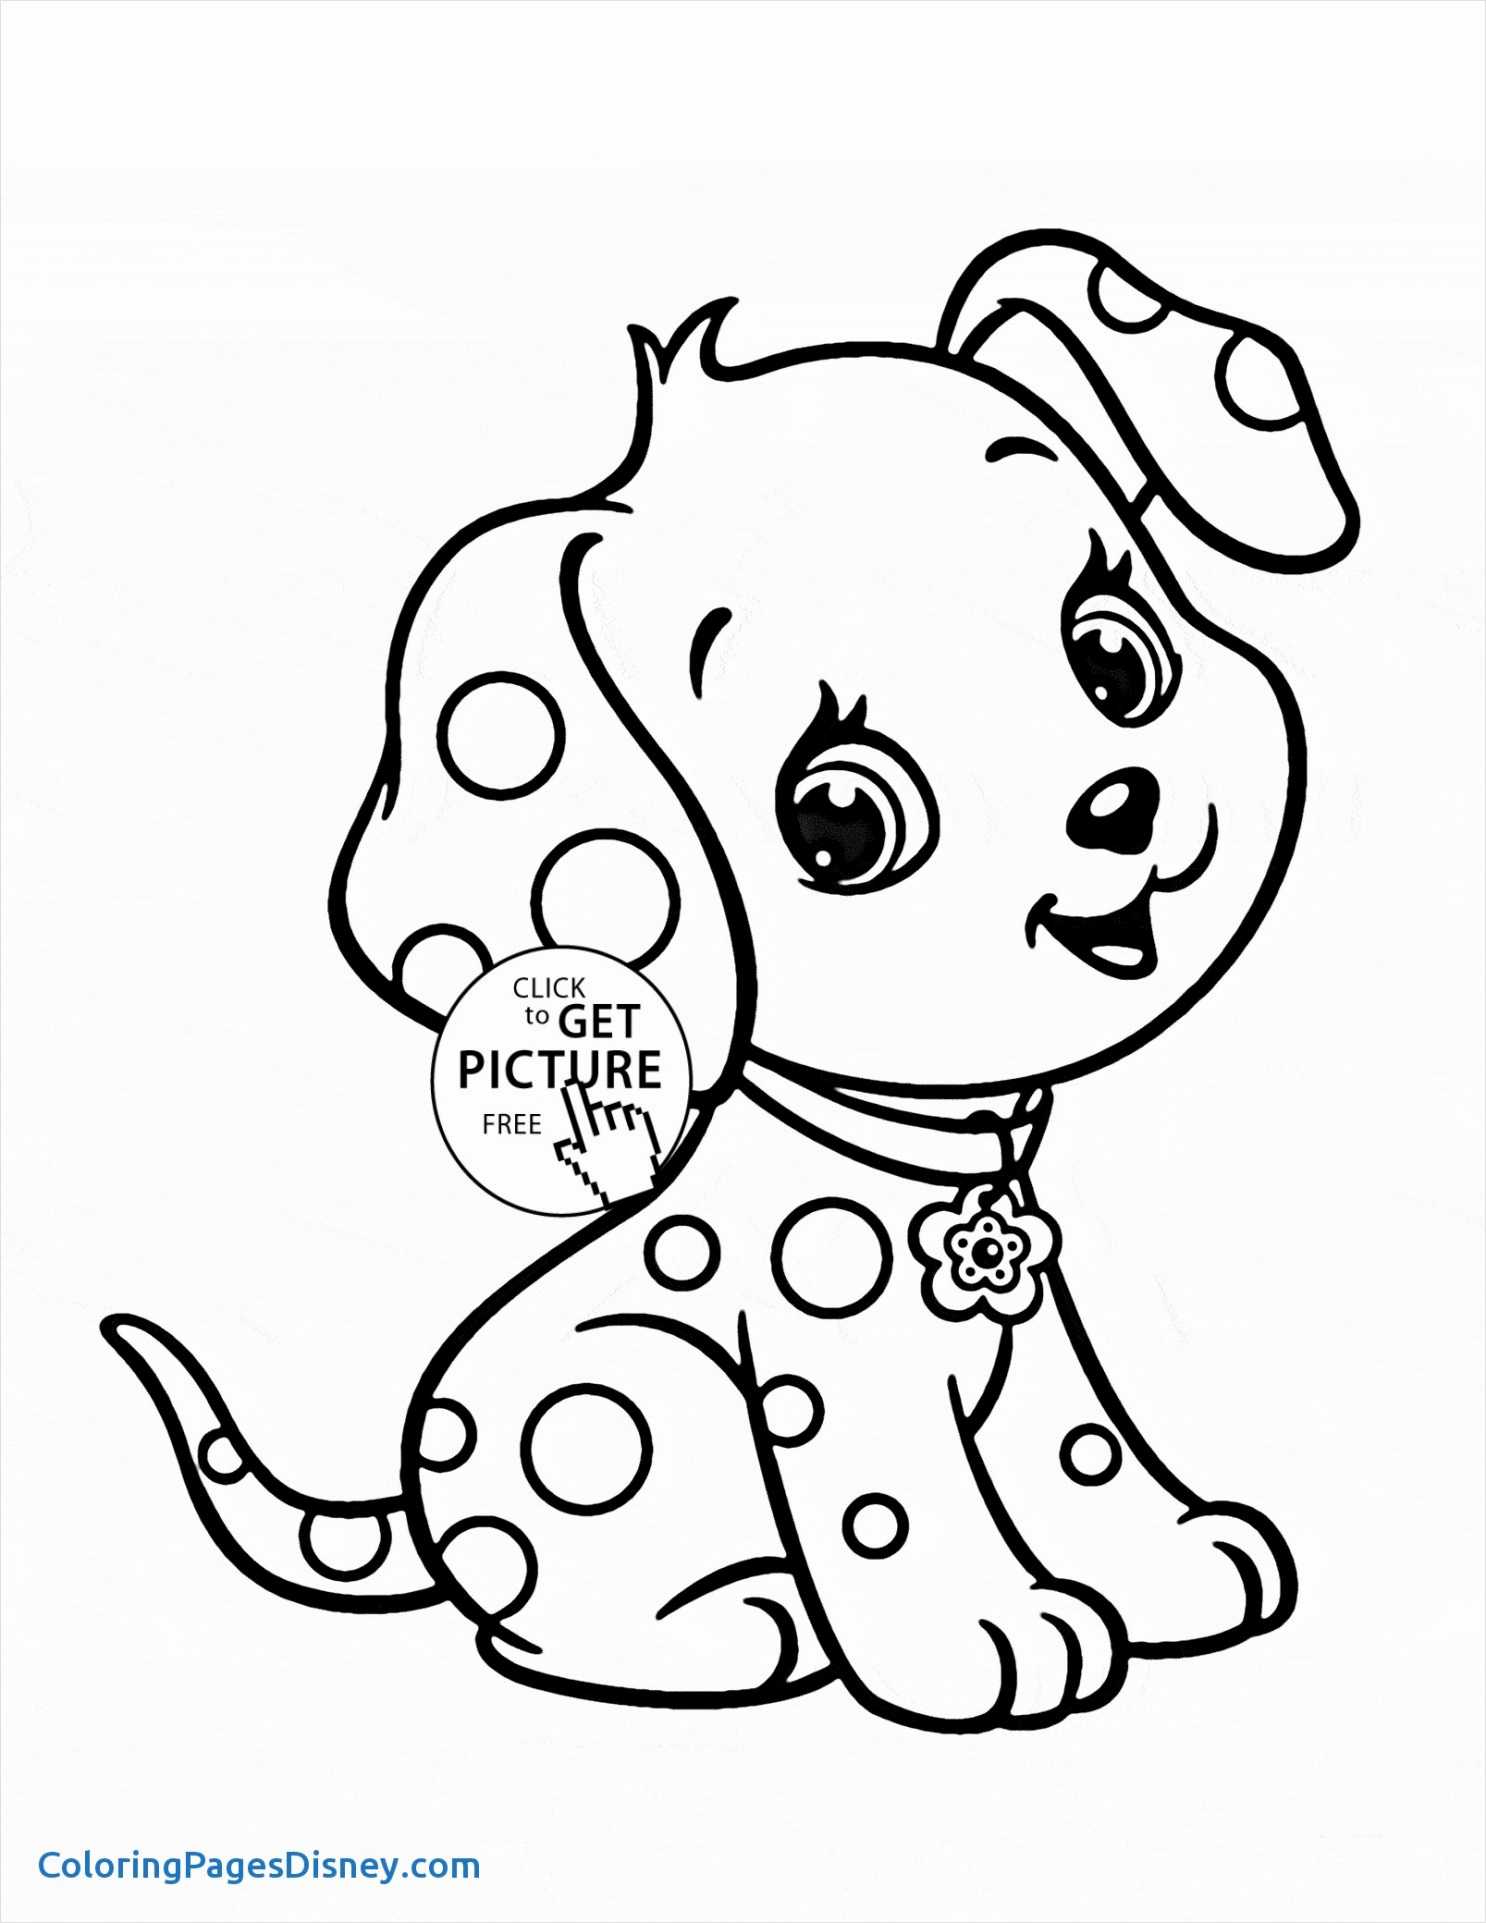 Coloring Worksheets for Preschool and Cool 50 Beautiful Picture Find Printable – Coloring Sheets for Kids